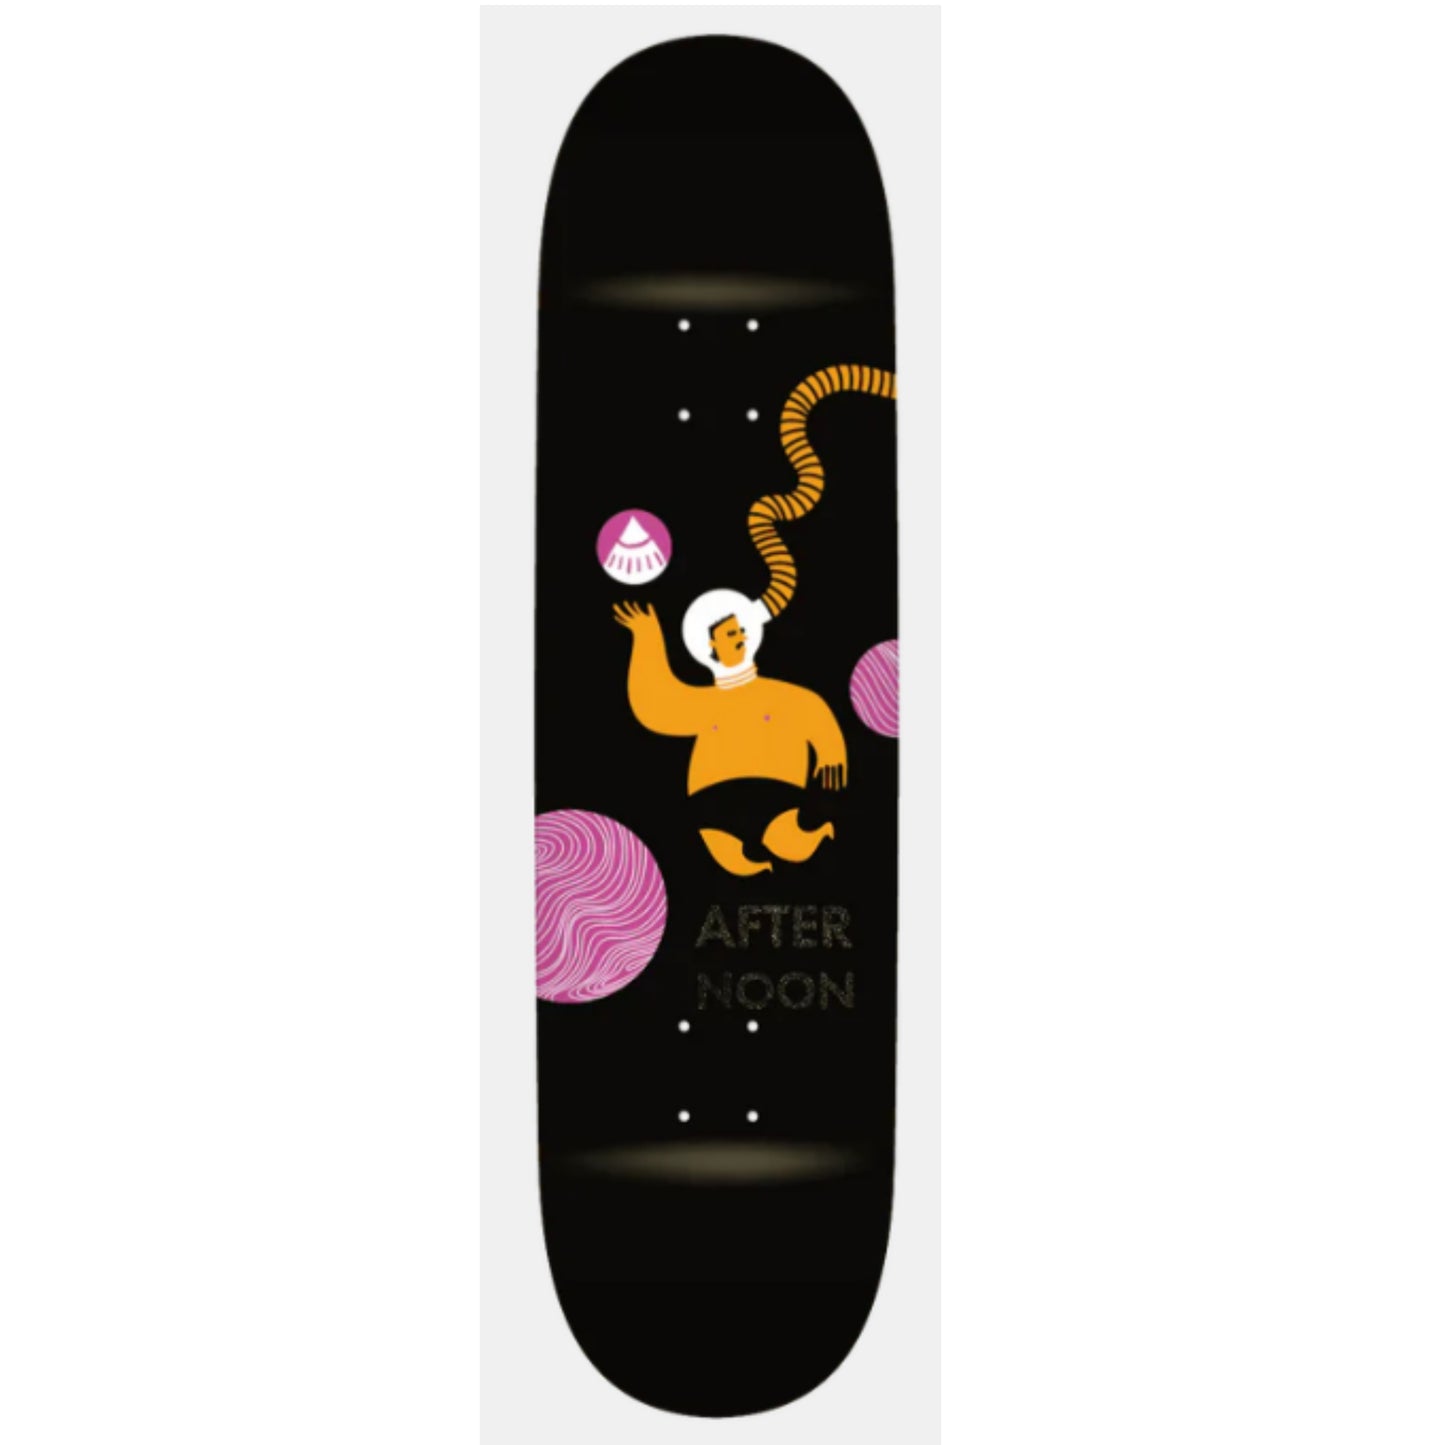 Afternoon - "To the Moon" - Skateboard Deck - 8.25"